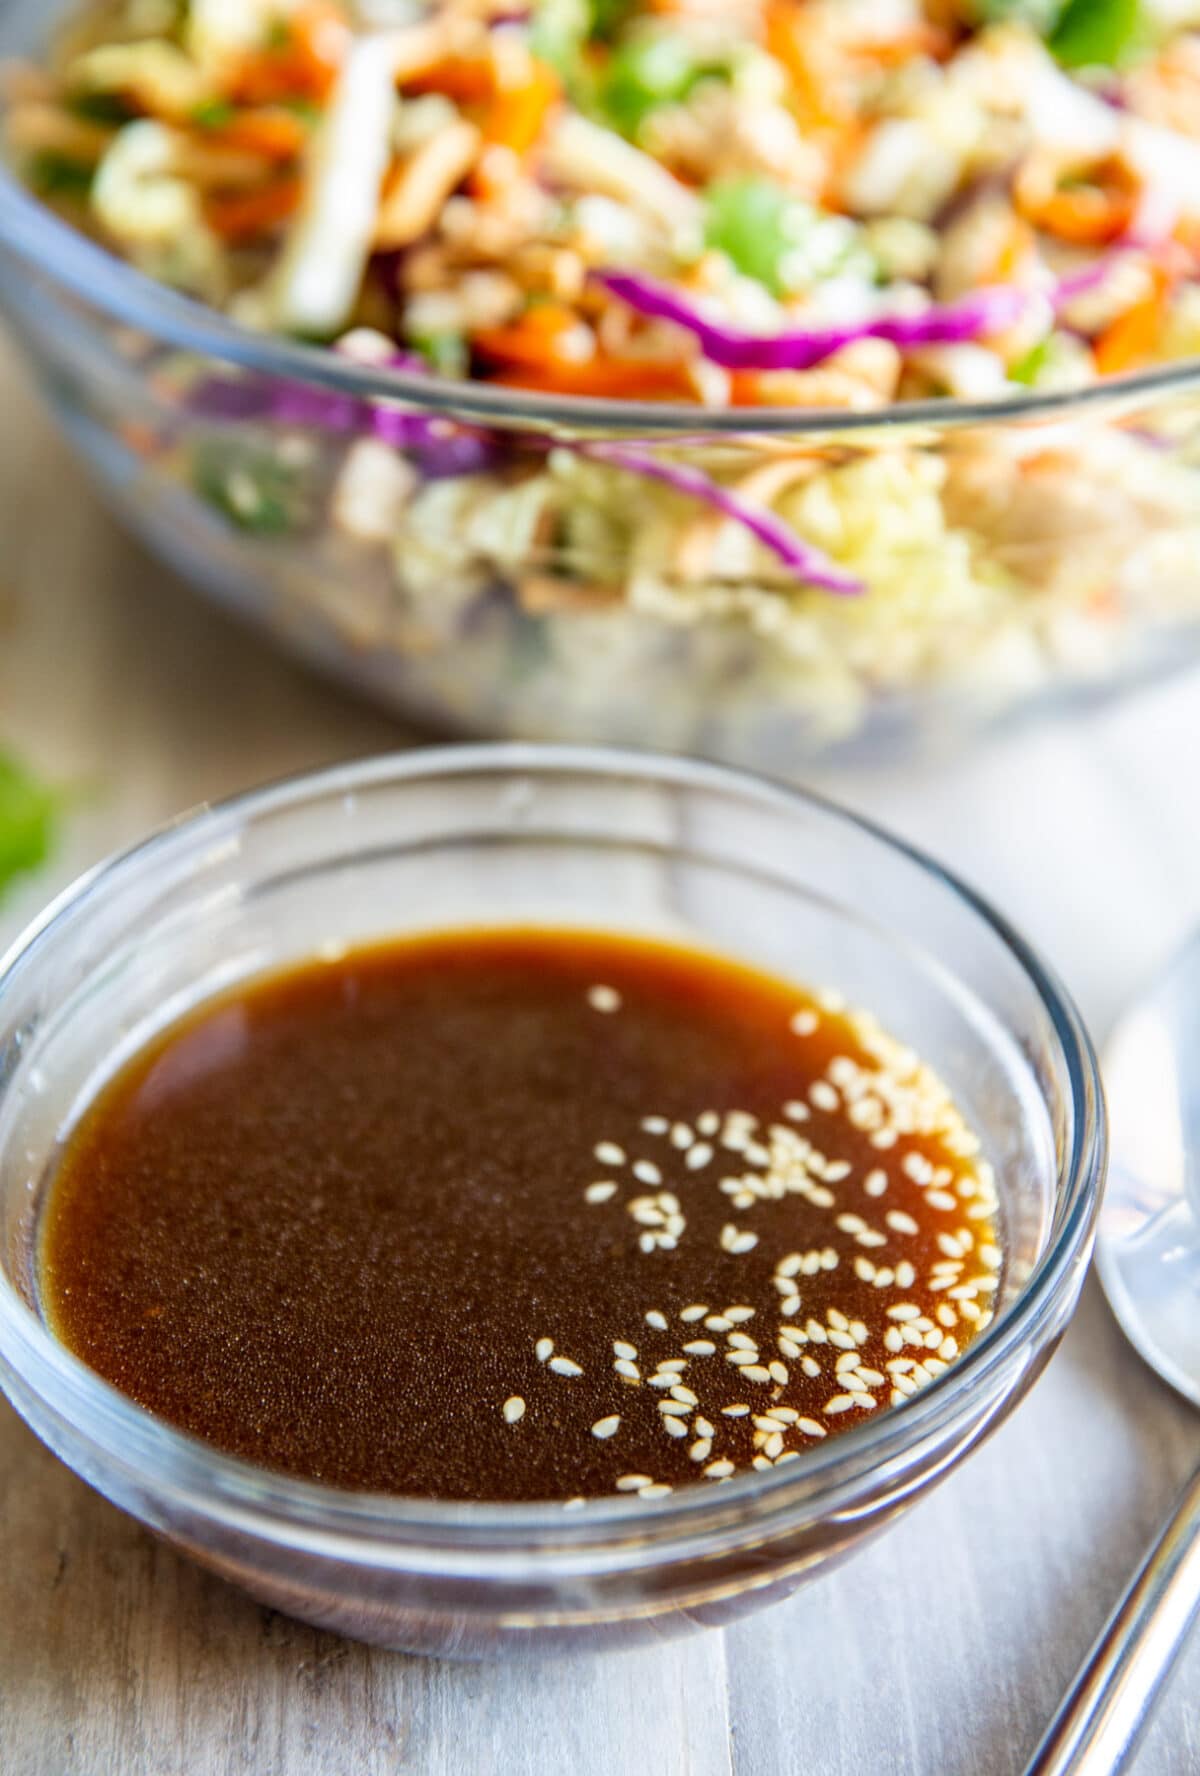 A bowl of Asian Salad Dressing sitting in front of a bowl of Chinese Chicken Salad.